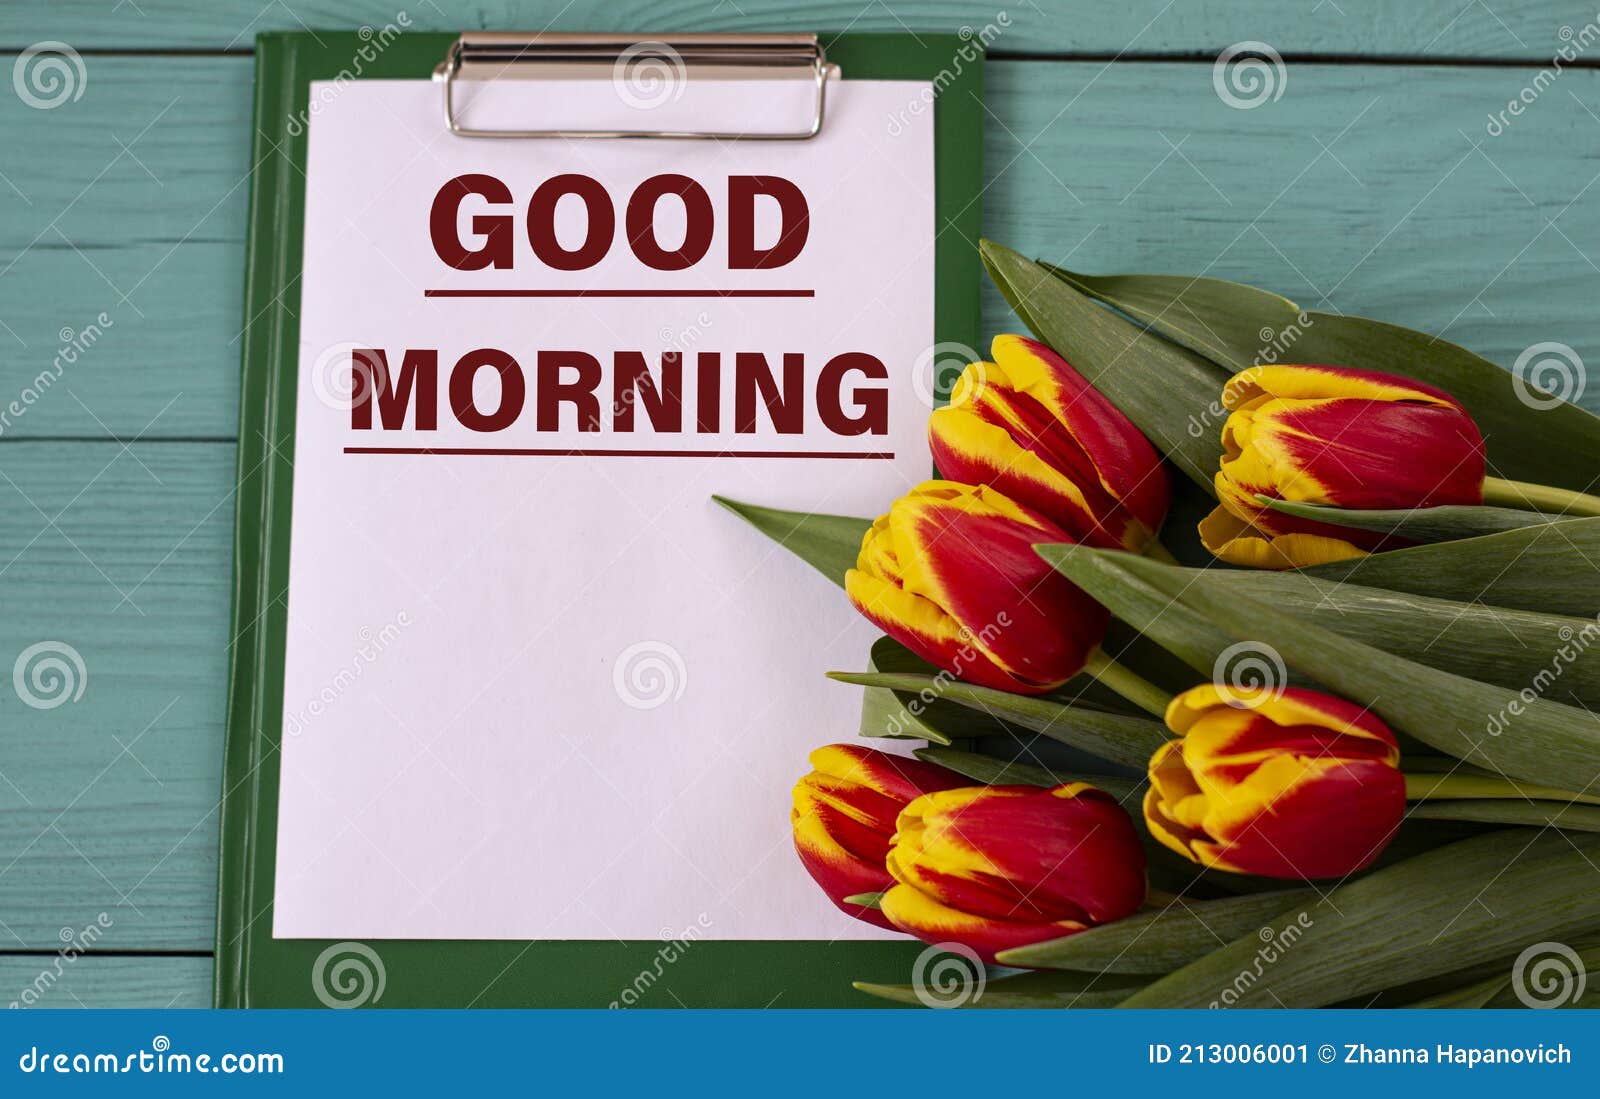 GOOD MORNING - Words on a White Sheet on a Green Background with ...